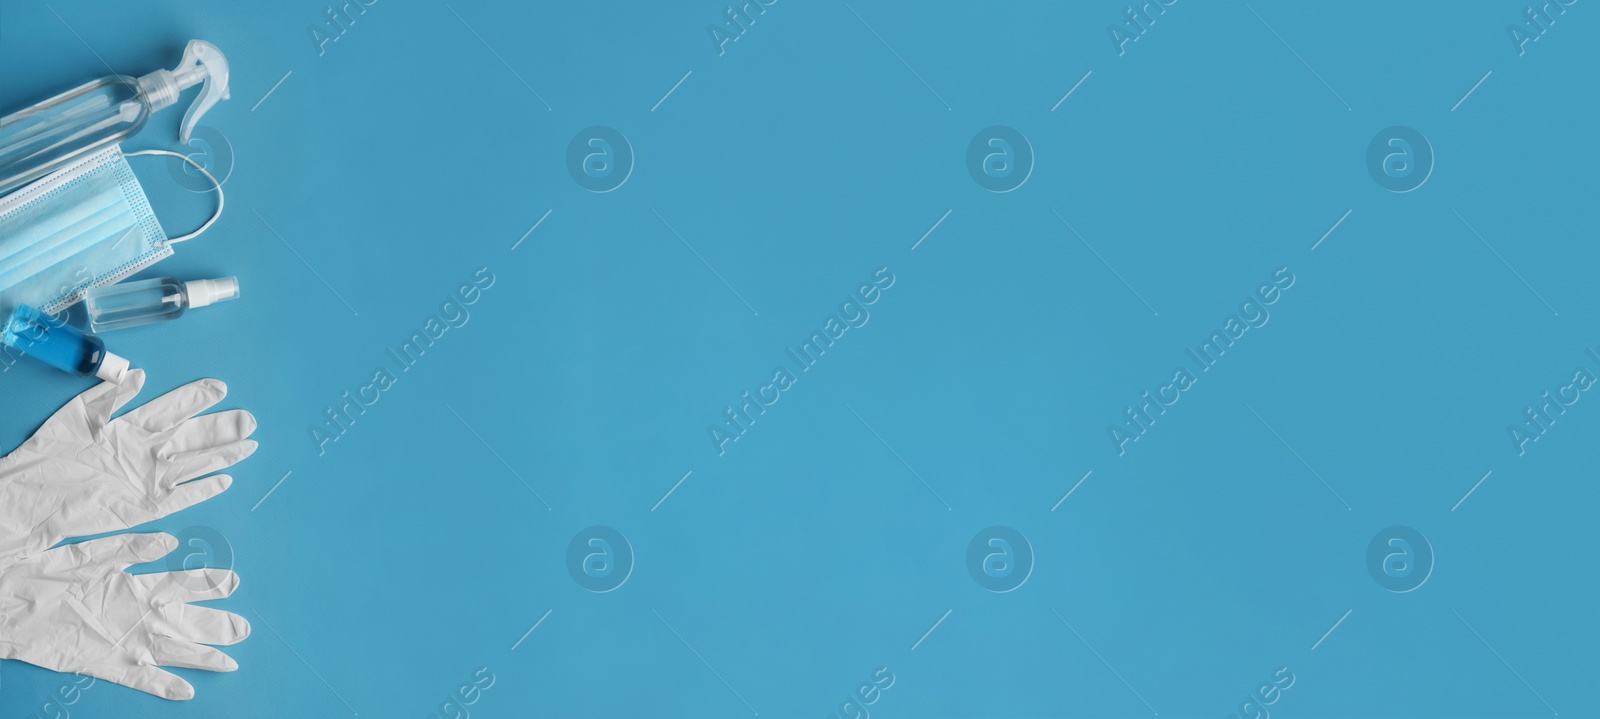 Image of Medical gloves, mask and hand sanitizers on blue background, flat lay. Banner design with space for text 